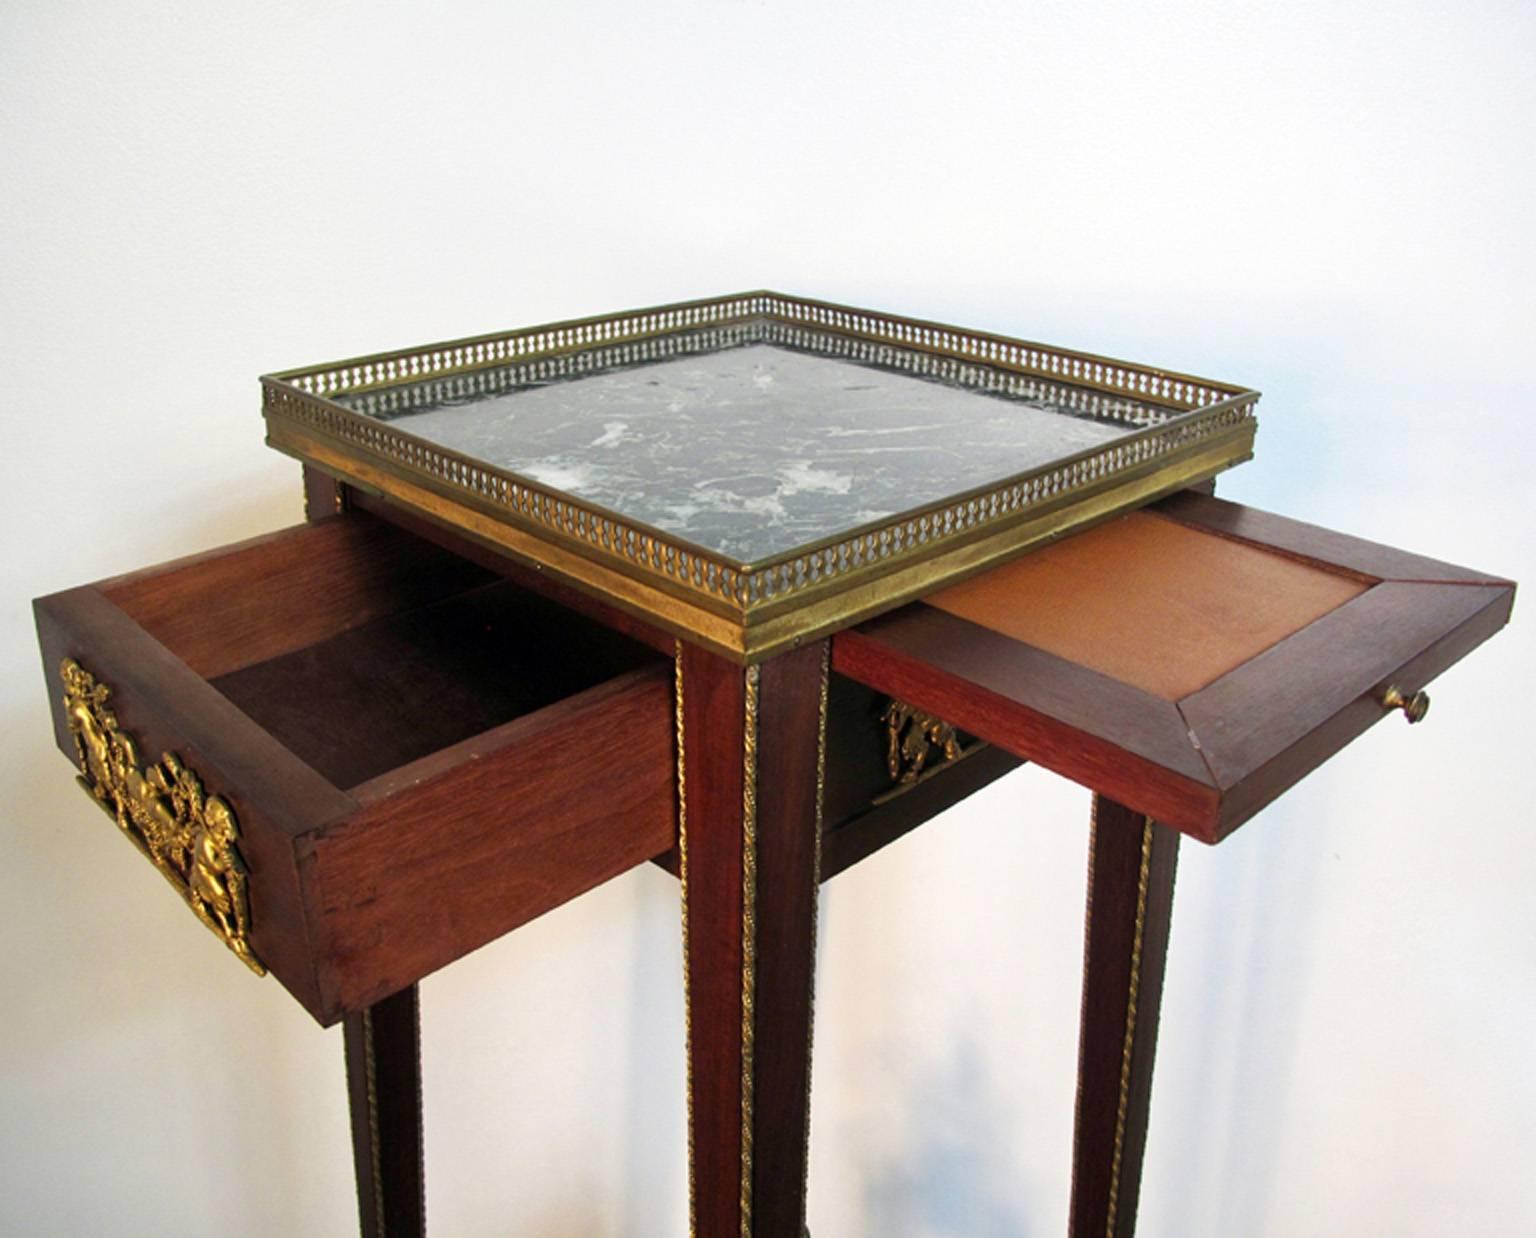 Antique Museum Stand or Pedestal Attributed to Linke In Good Condition For Sale In Bridport, CT